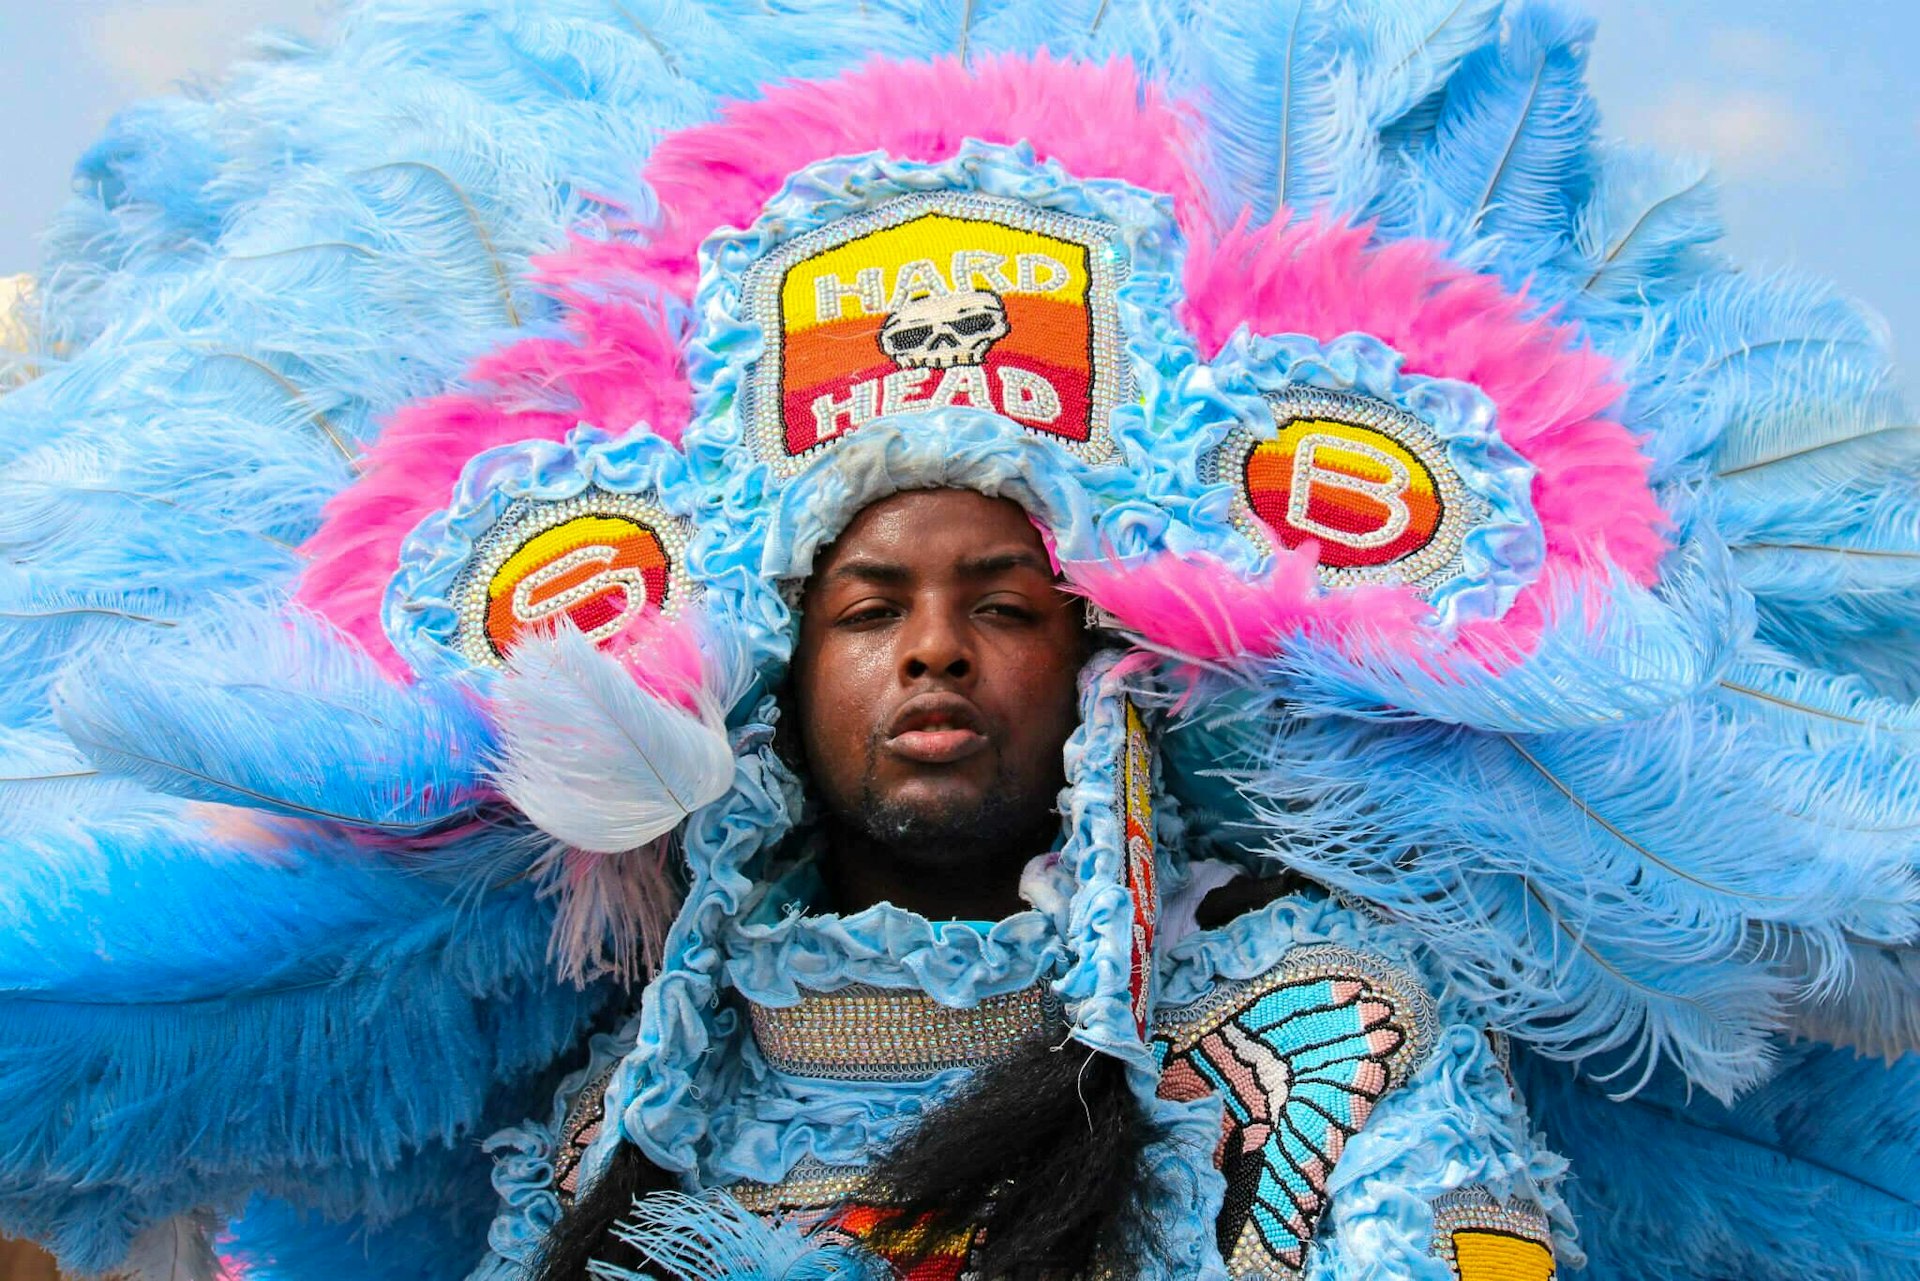 A Mardi Gras Indian dressed in an elaborate blue feathered costume in New Orleans